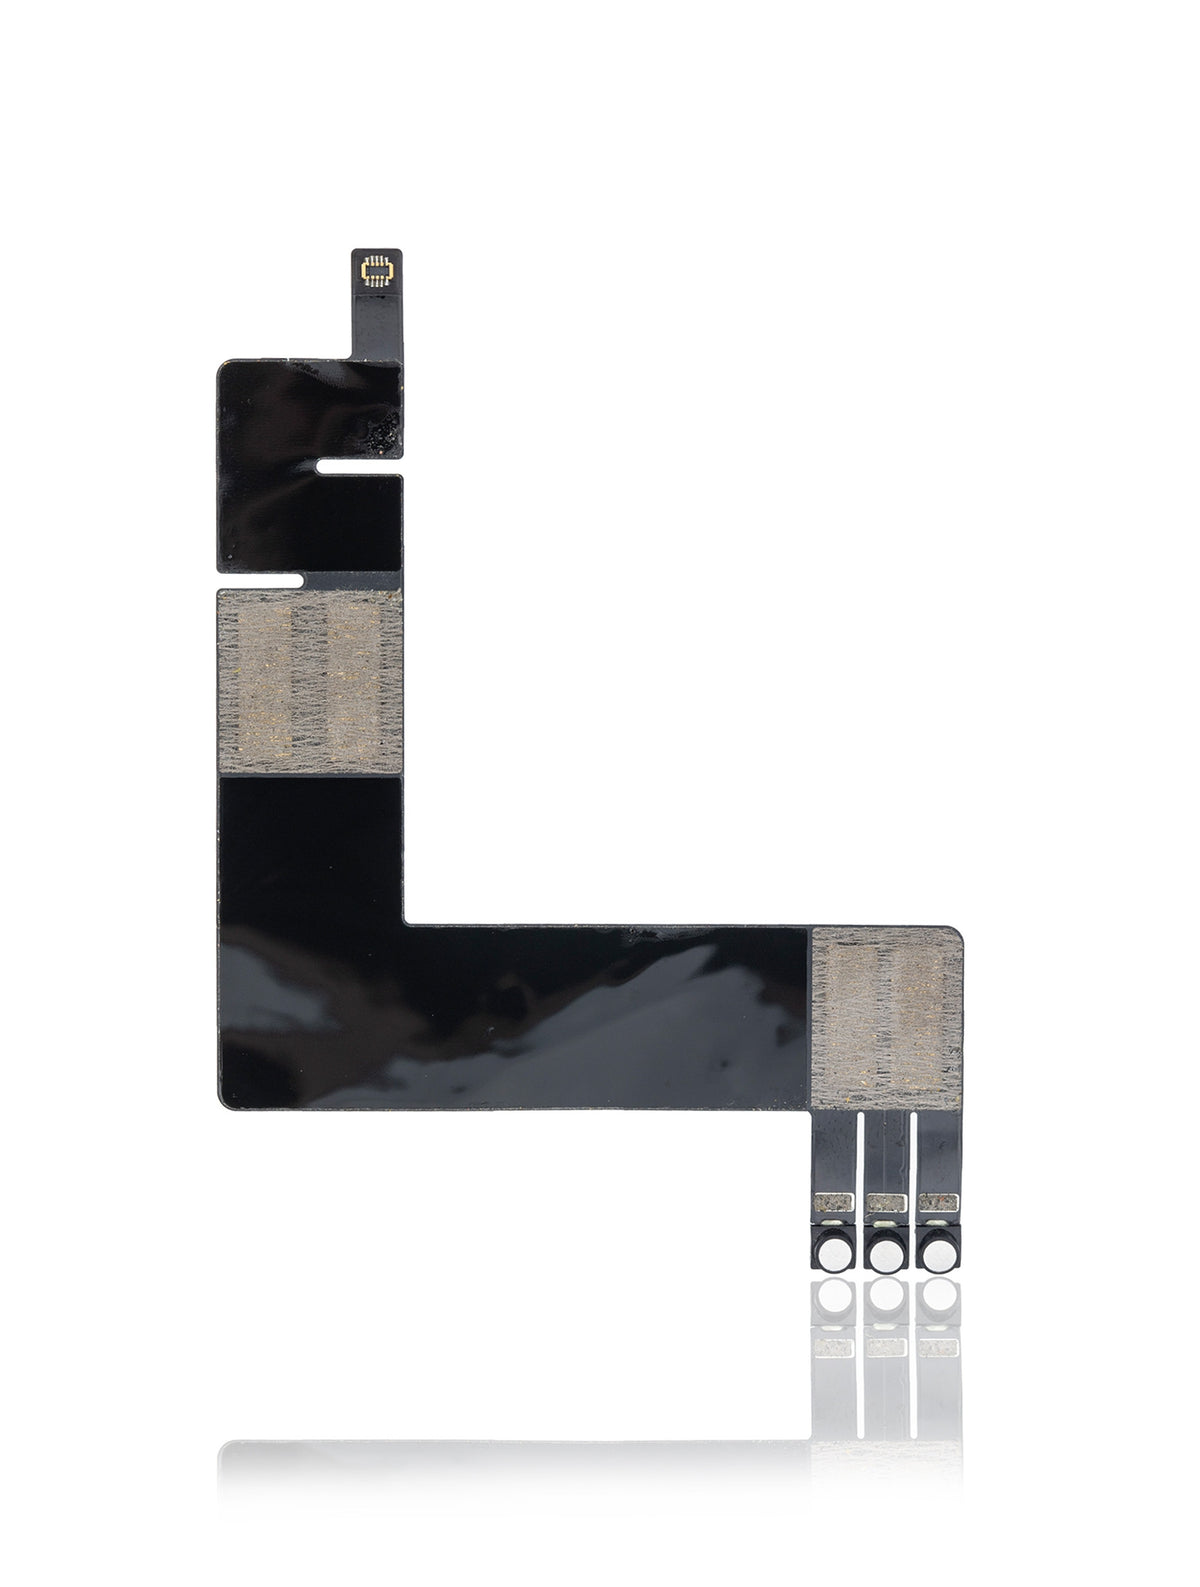 KEYBOARD FLEX CABLE (Black) COMPATIBLE WITH IPAD PRO 10.5" 1ST